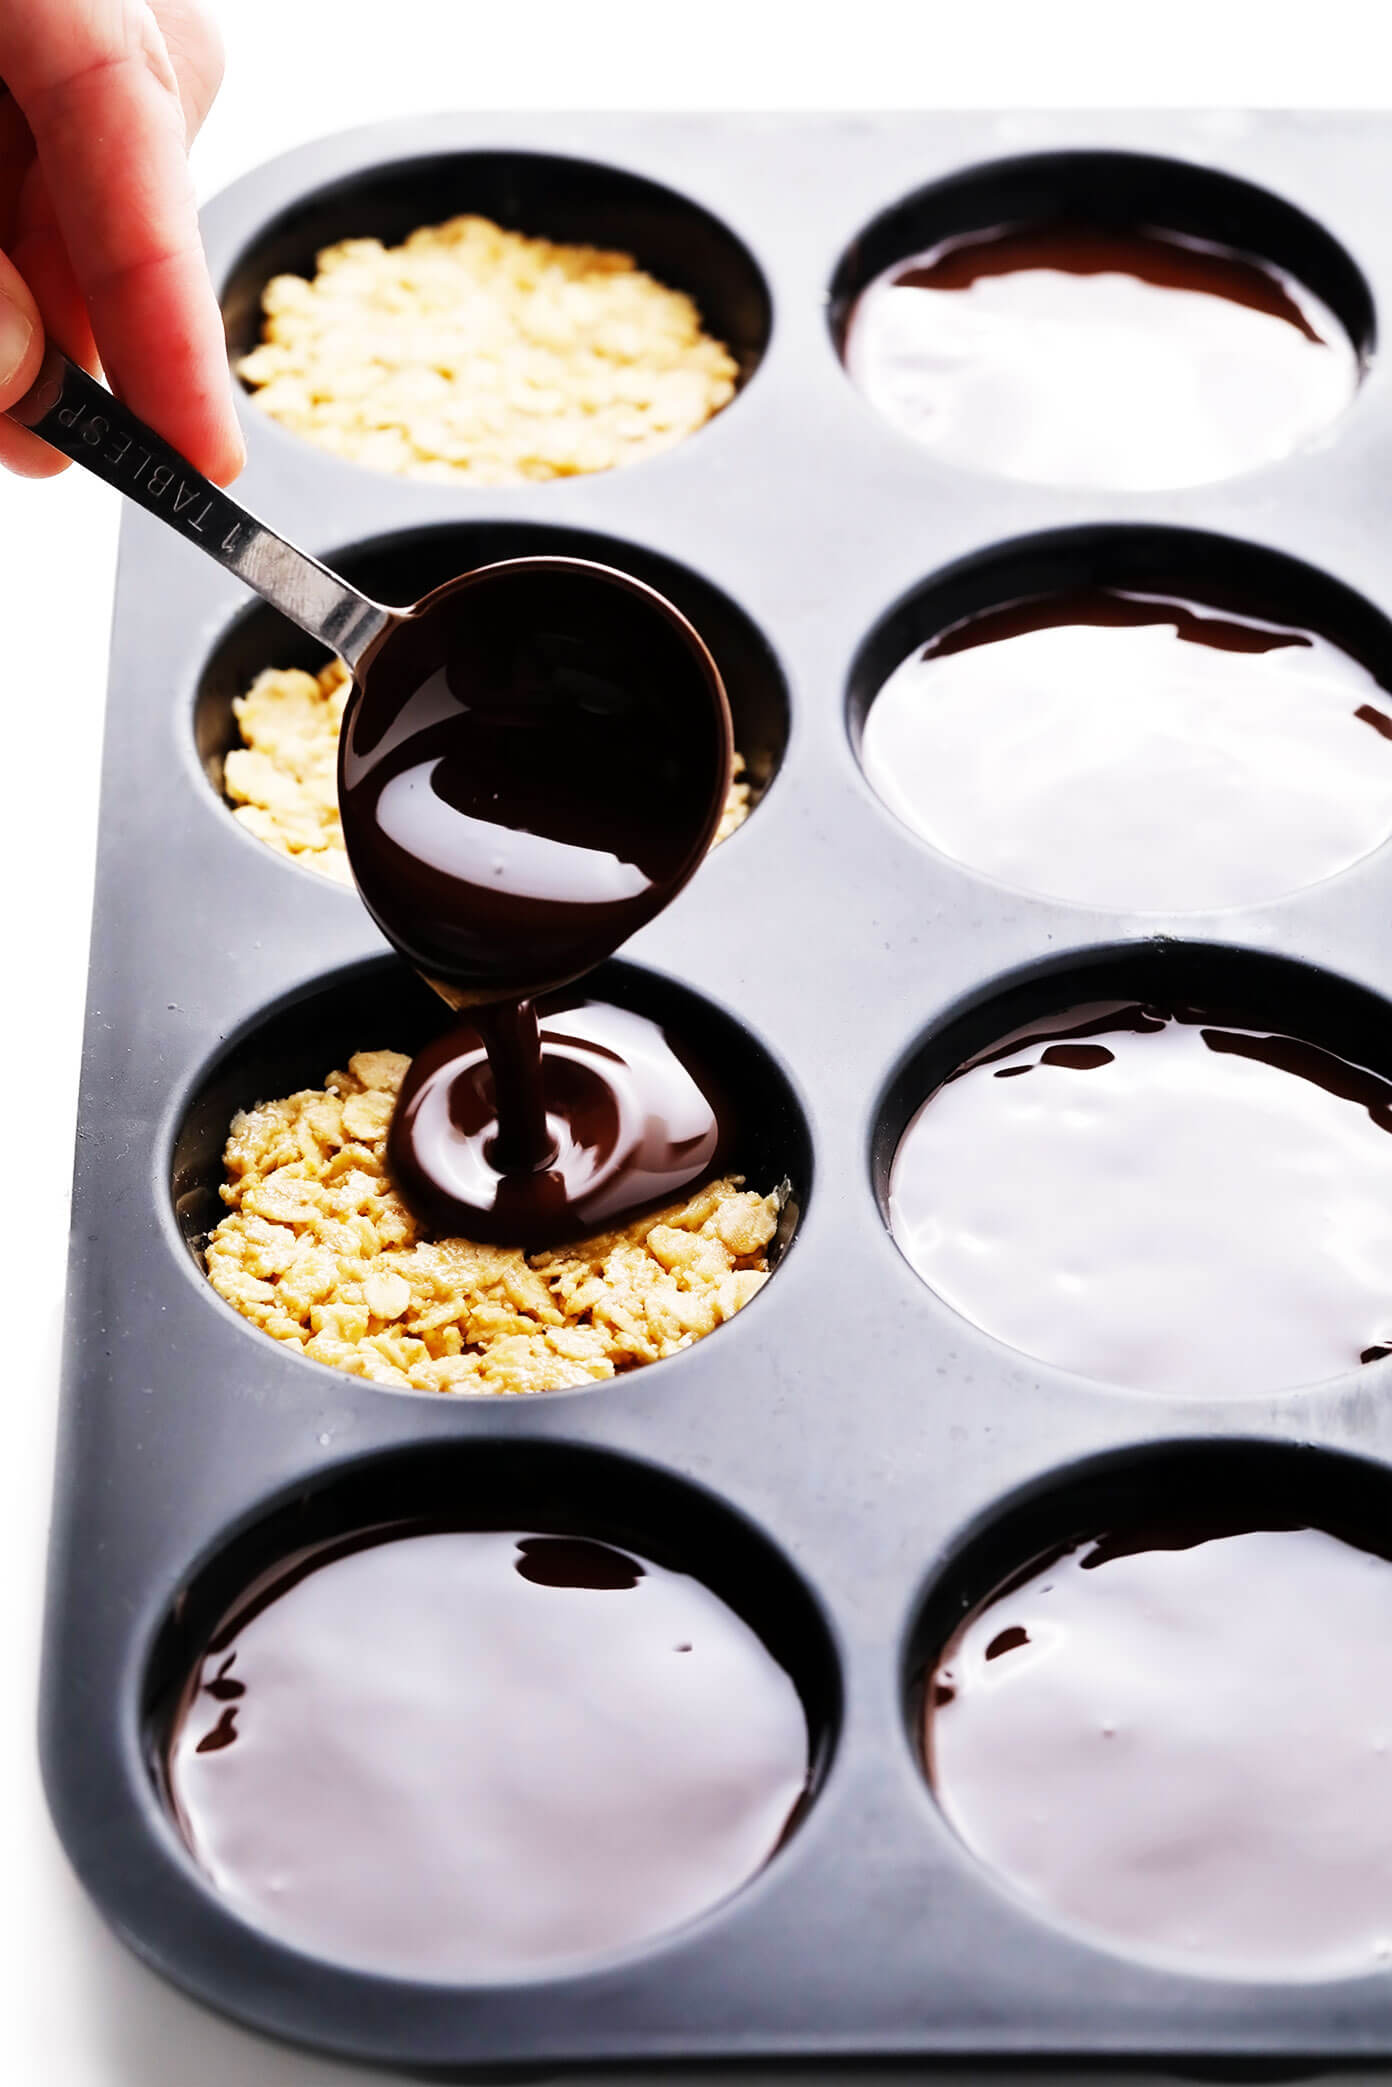 Drizzling Chocolate onto Salted Chocolate Peanut Butter Oat Cups